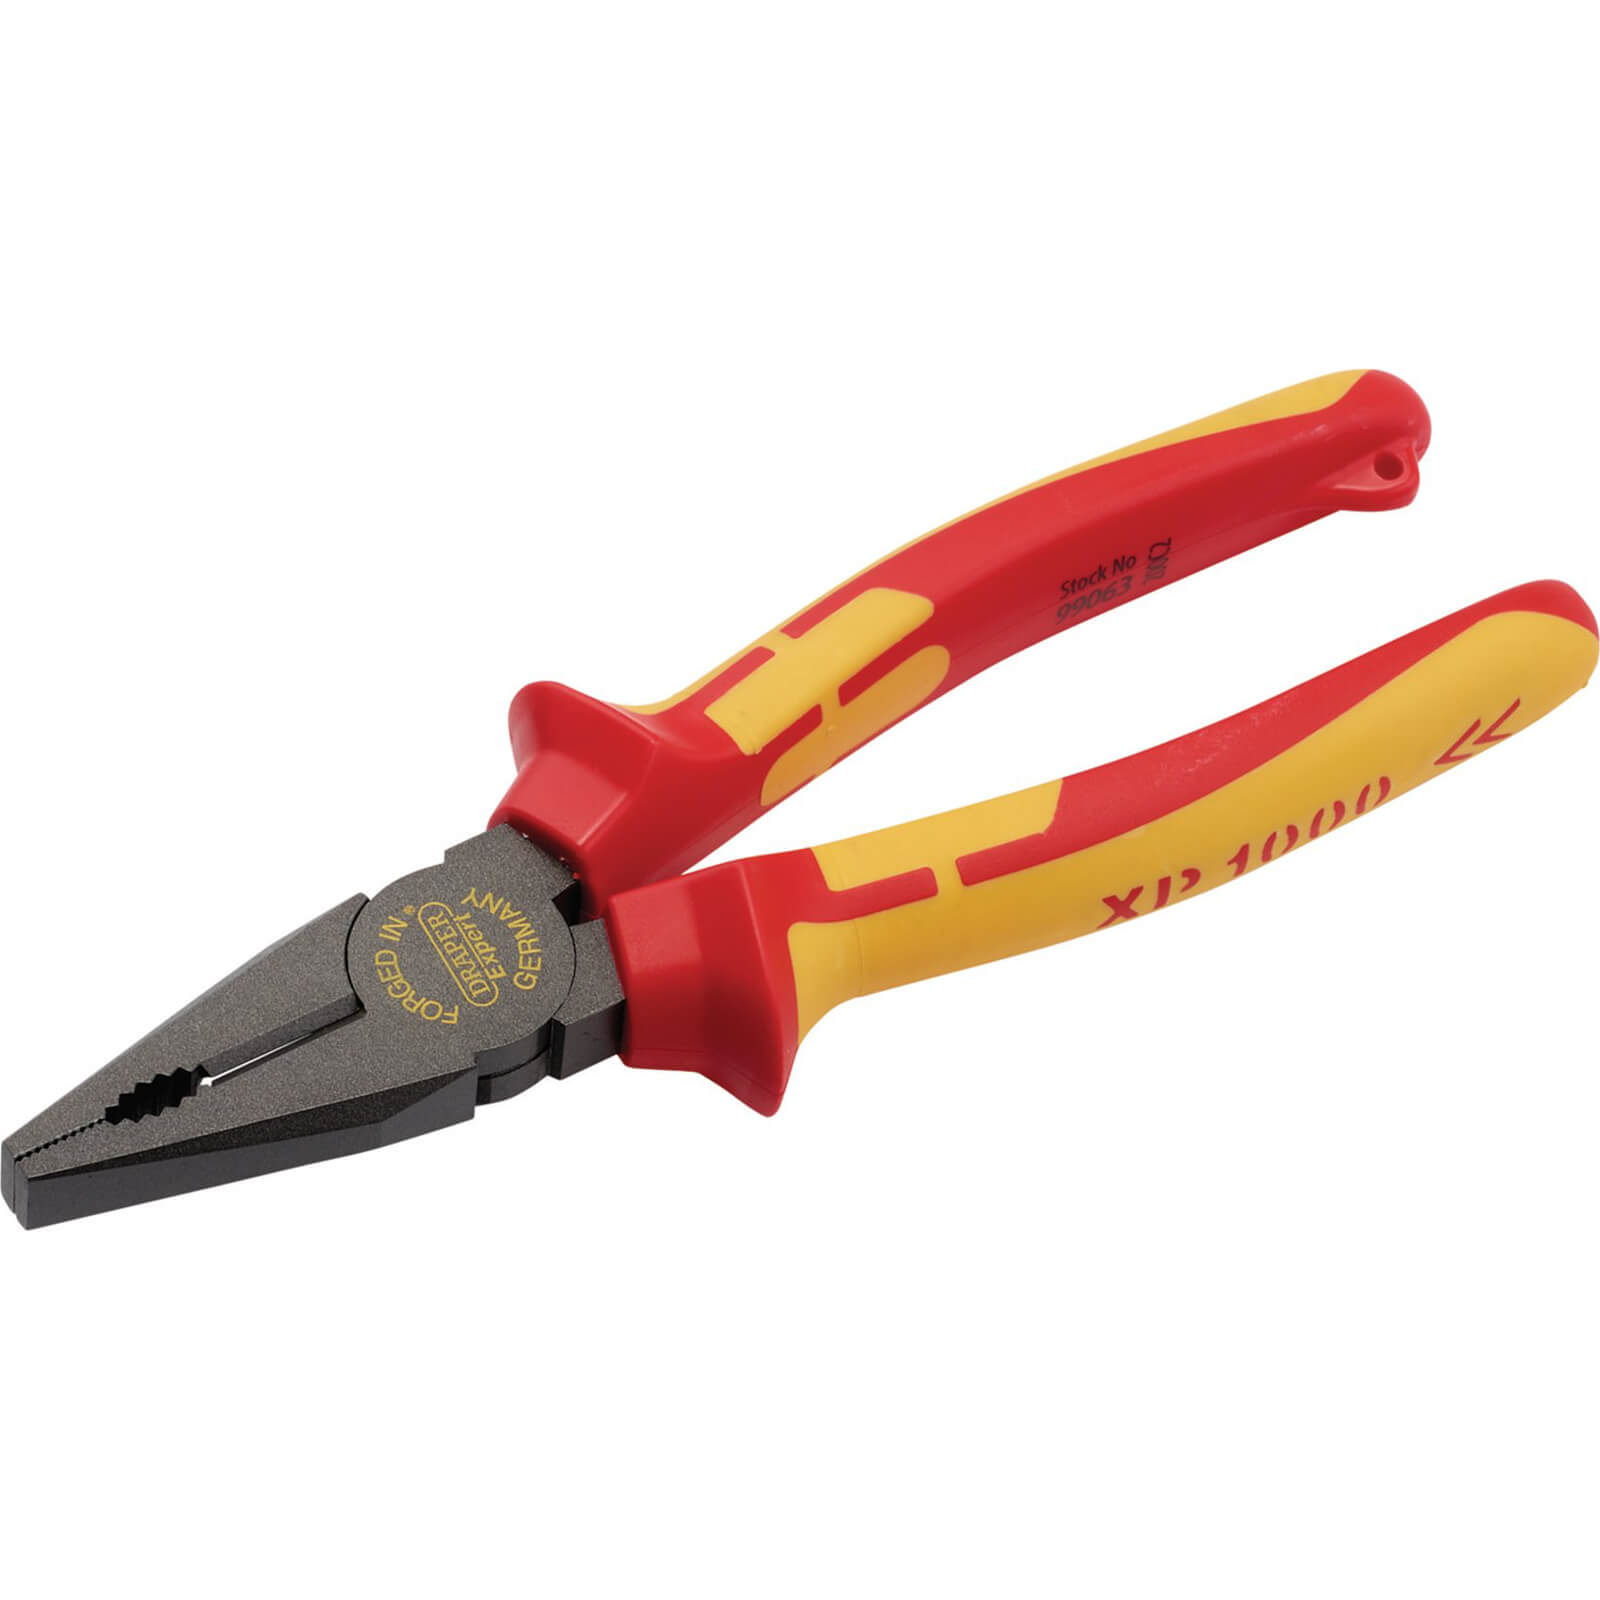 Draper XP1000 VDE Insulated Tethered Combination Pliers 200mm